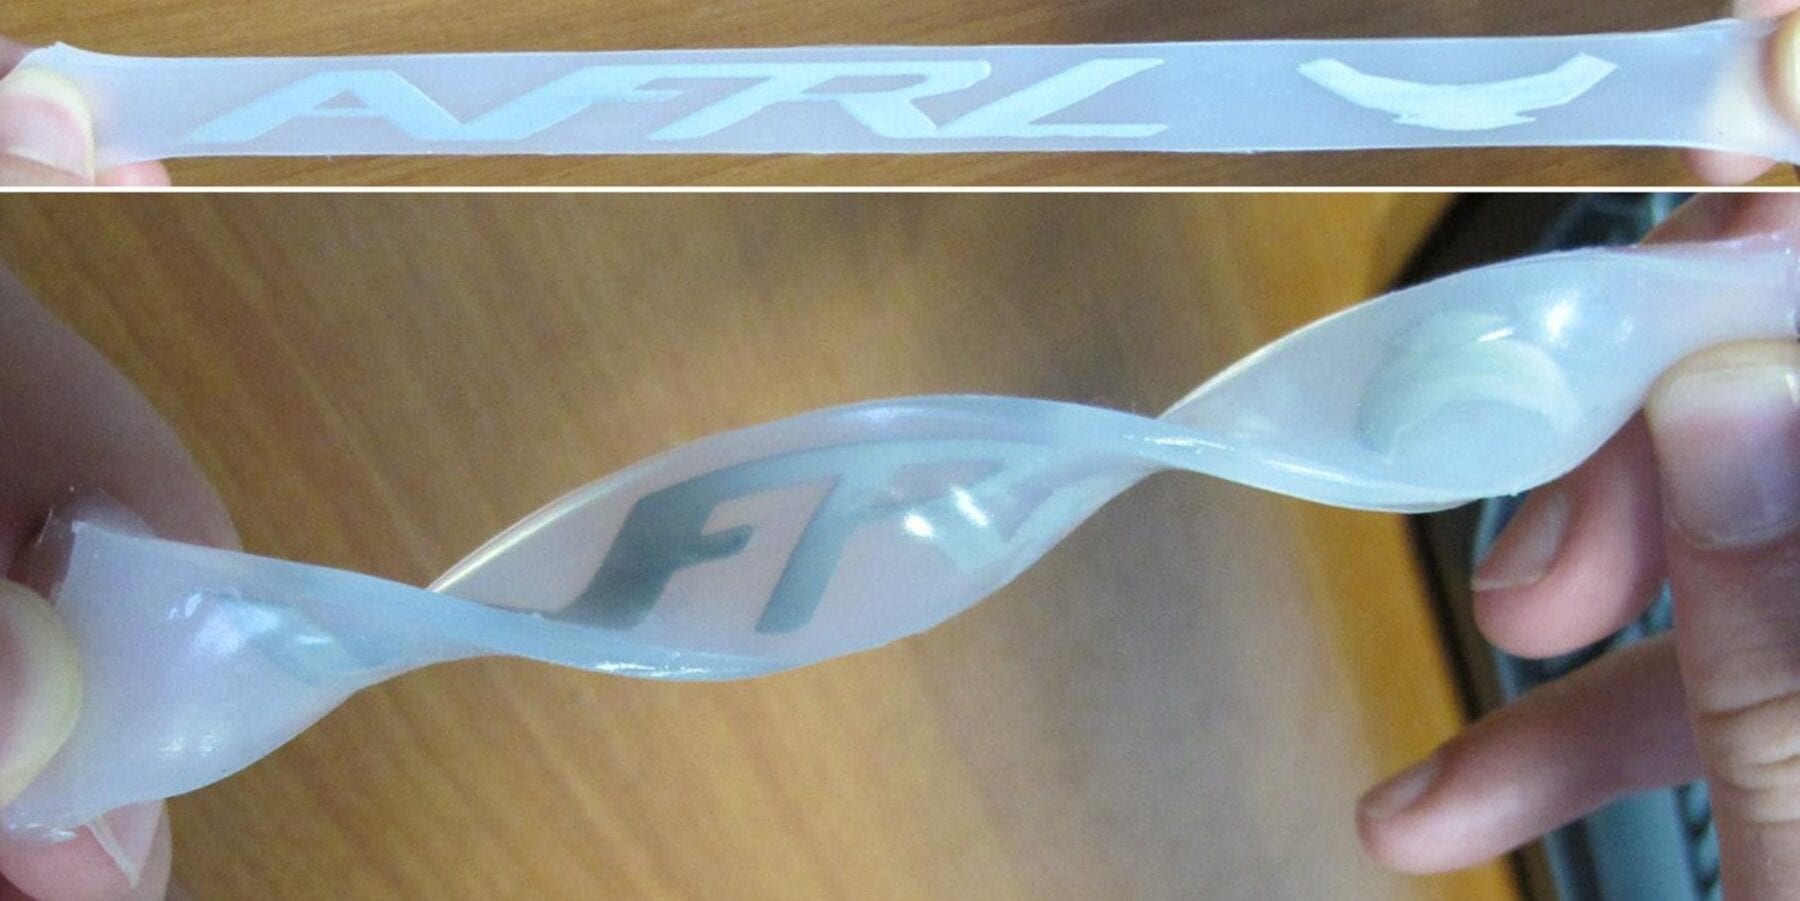 A New Design for an Easily Fabricated, Flexible and Wearable White-Light LED